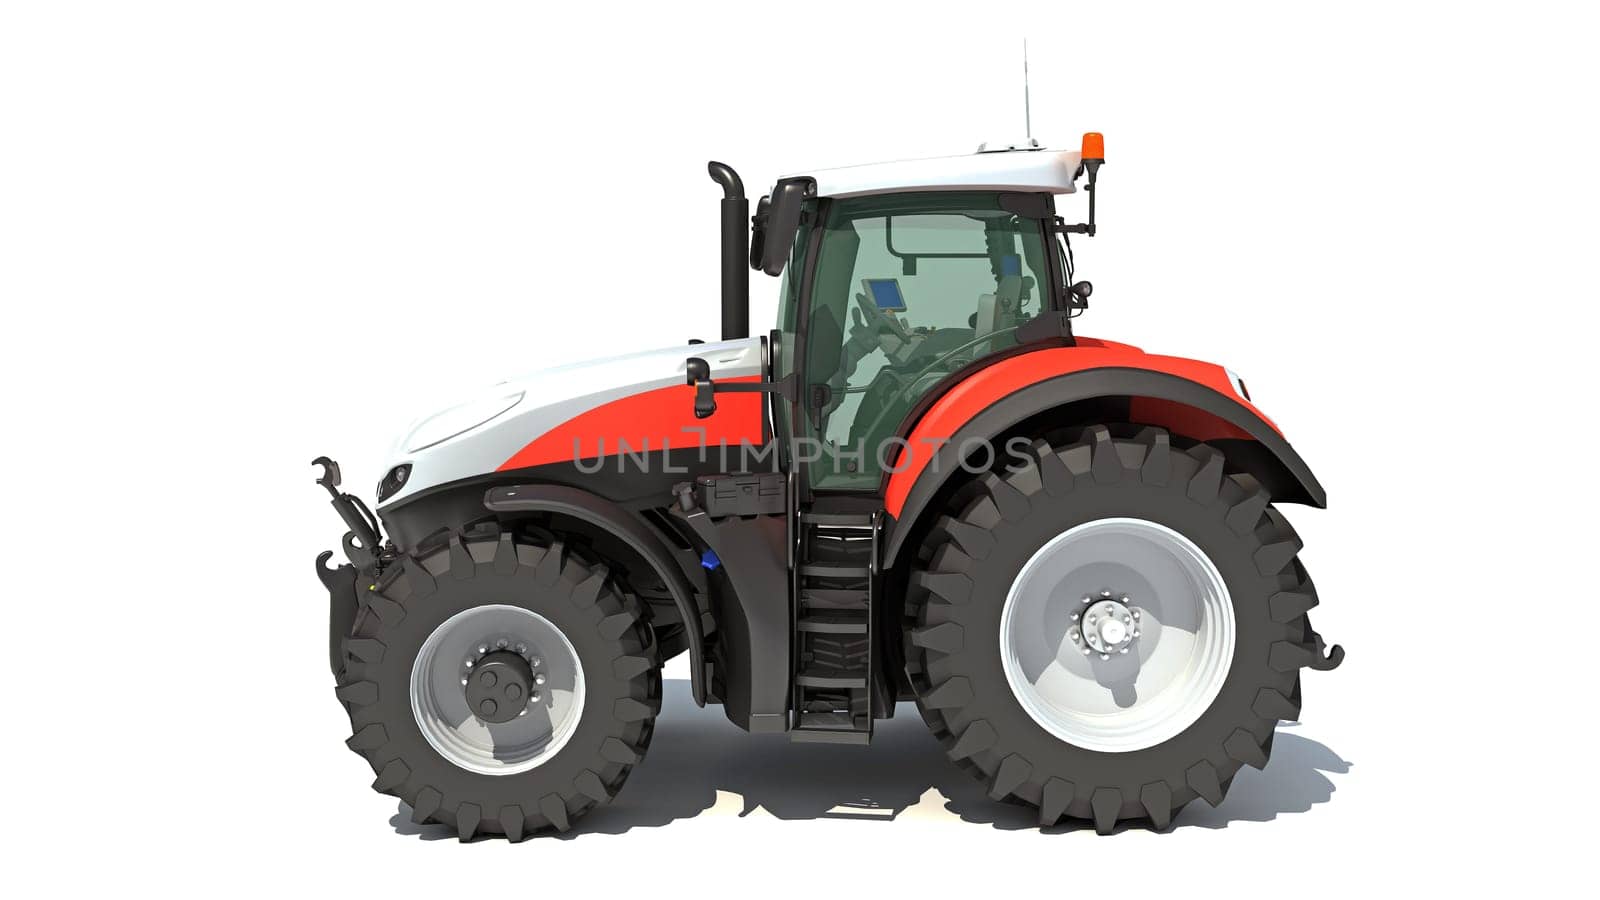 3D rendering of Farm Tractor model on white background by 3DHorse